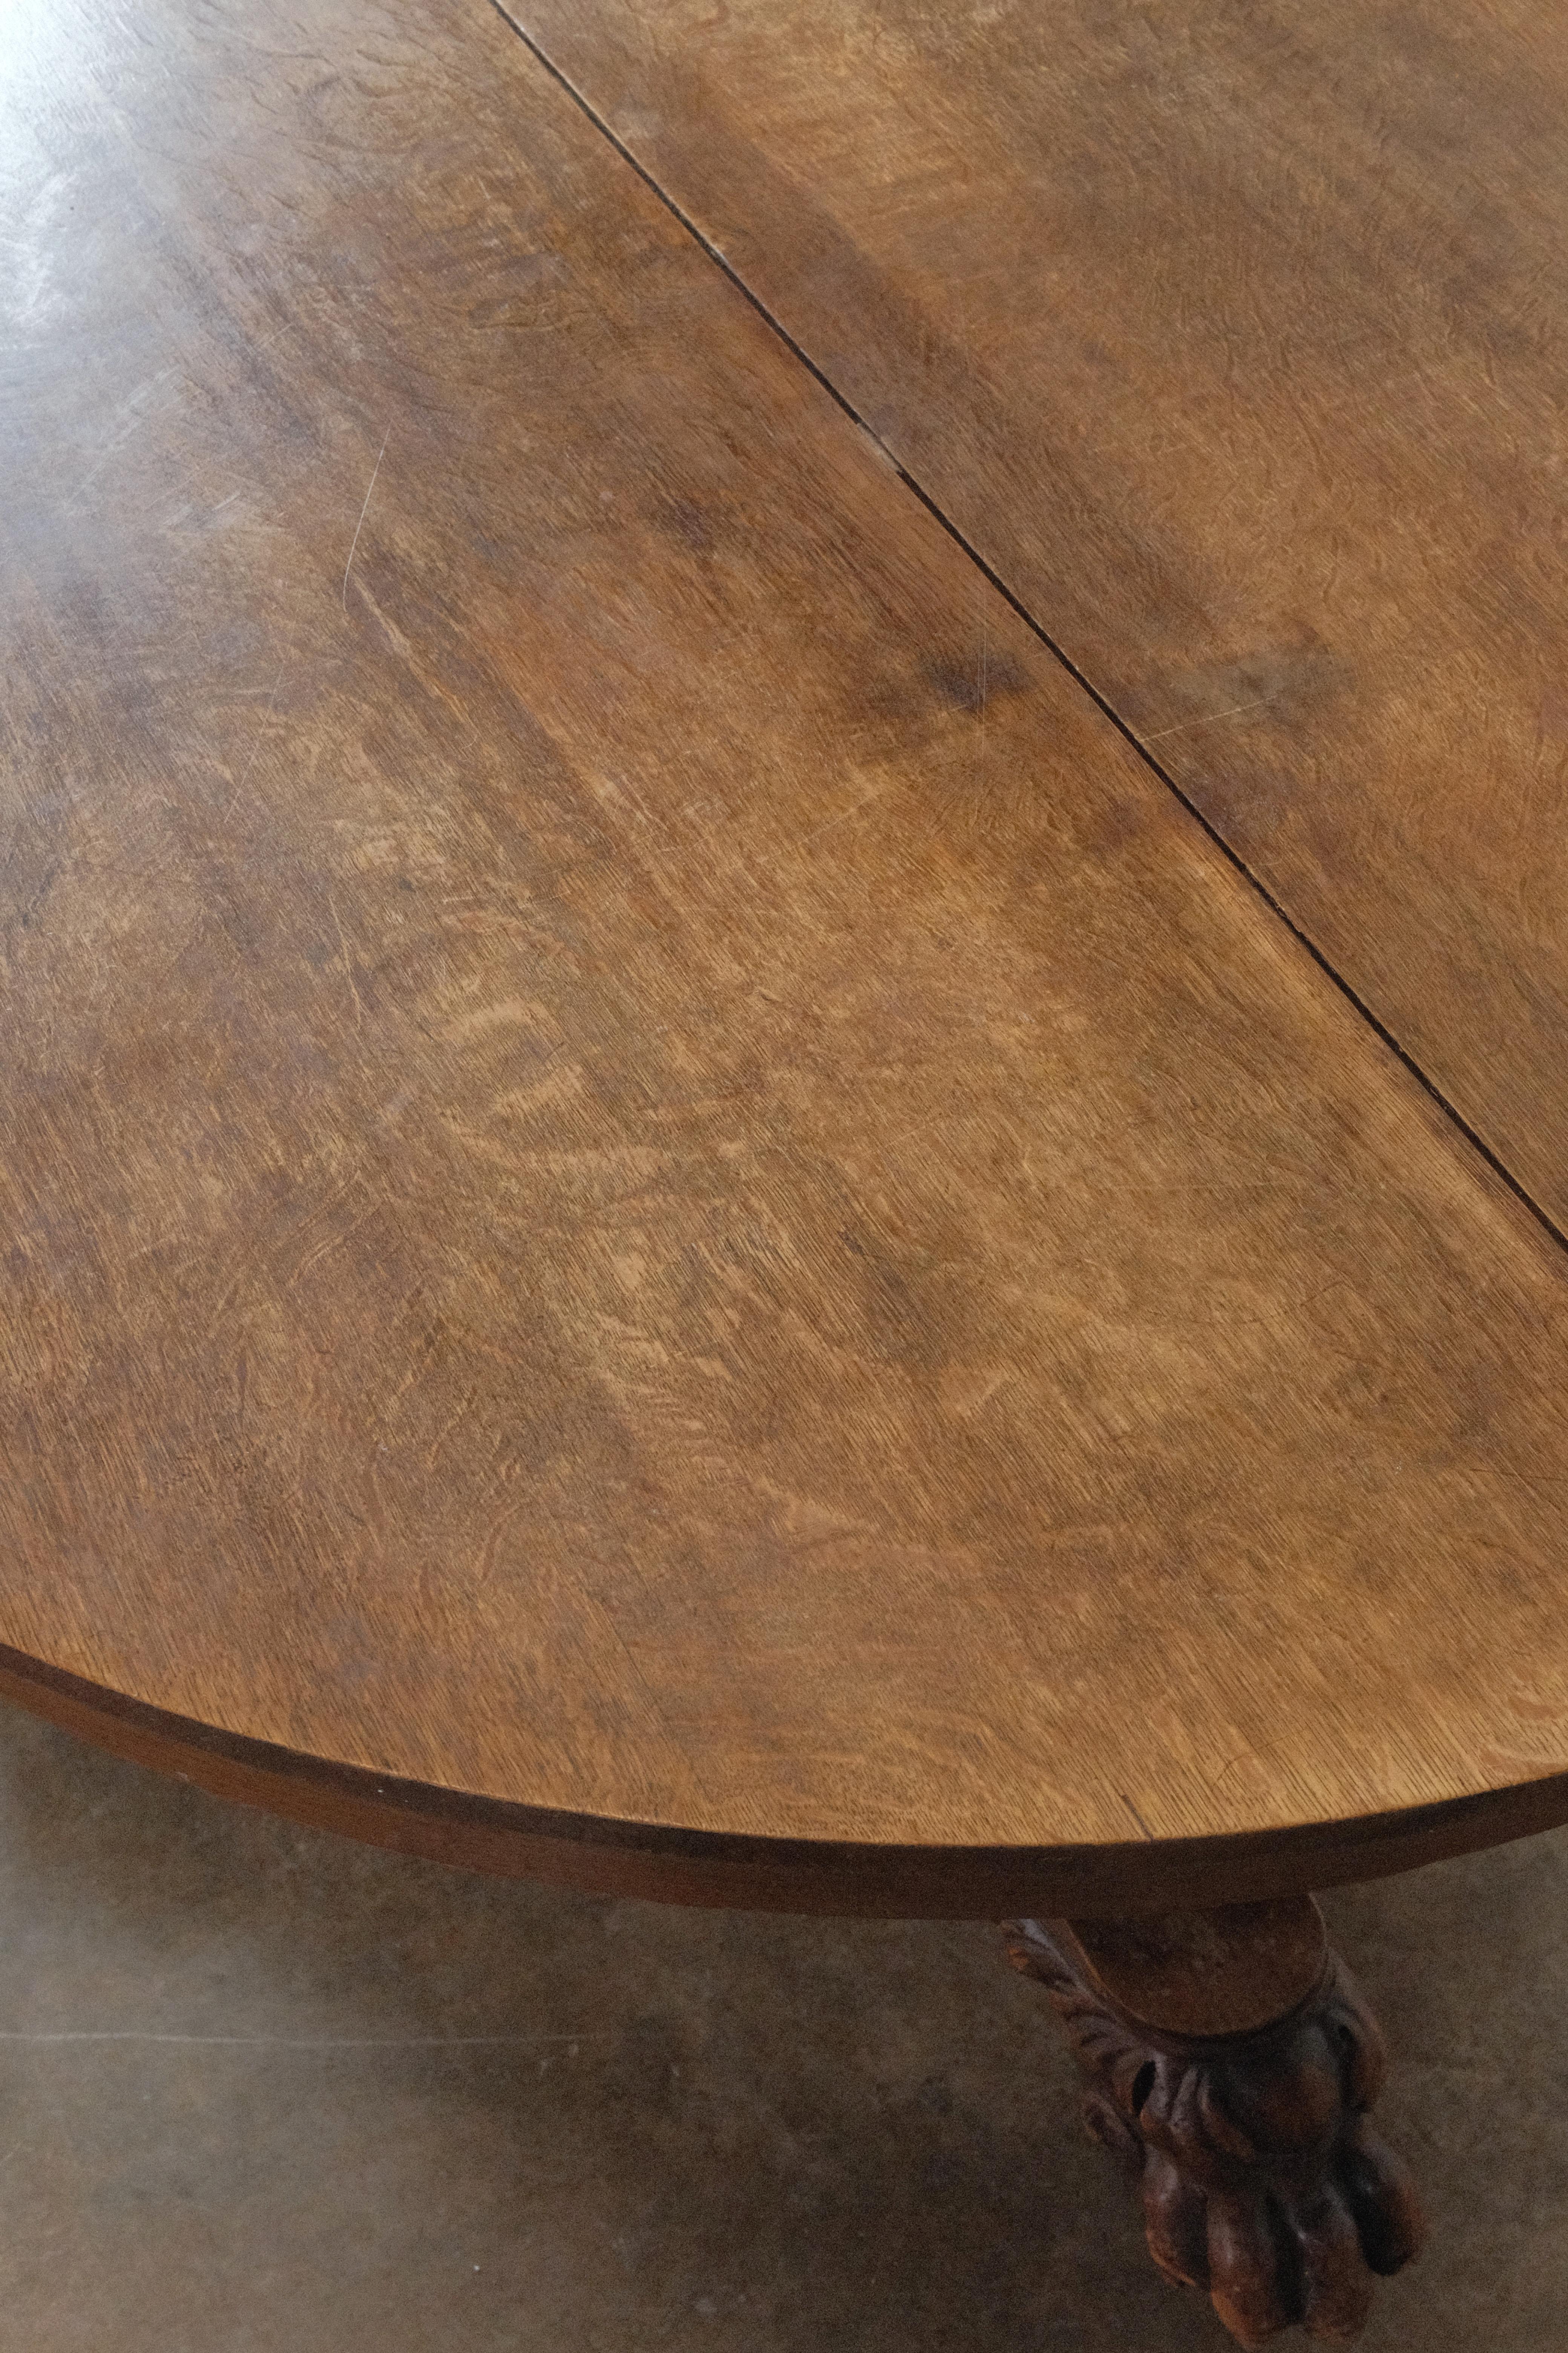 antique round wooden table